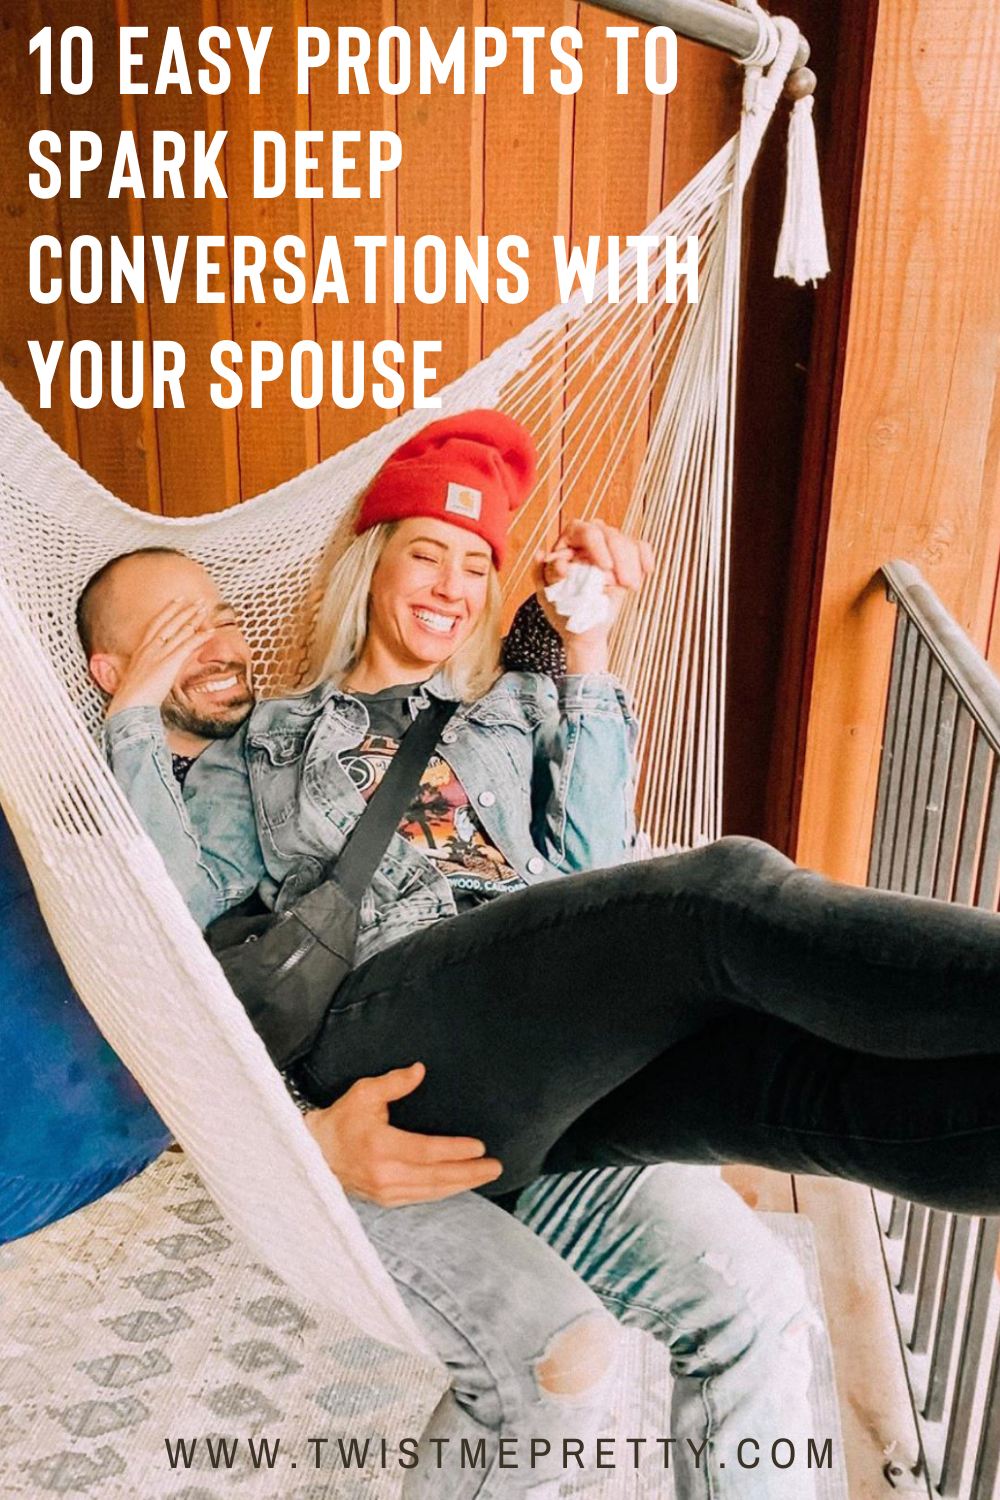 10 easy prompts to spark deep conversations with your spouse. www.twistmepretty.com